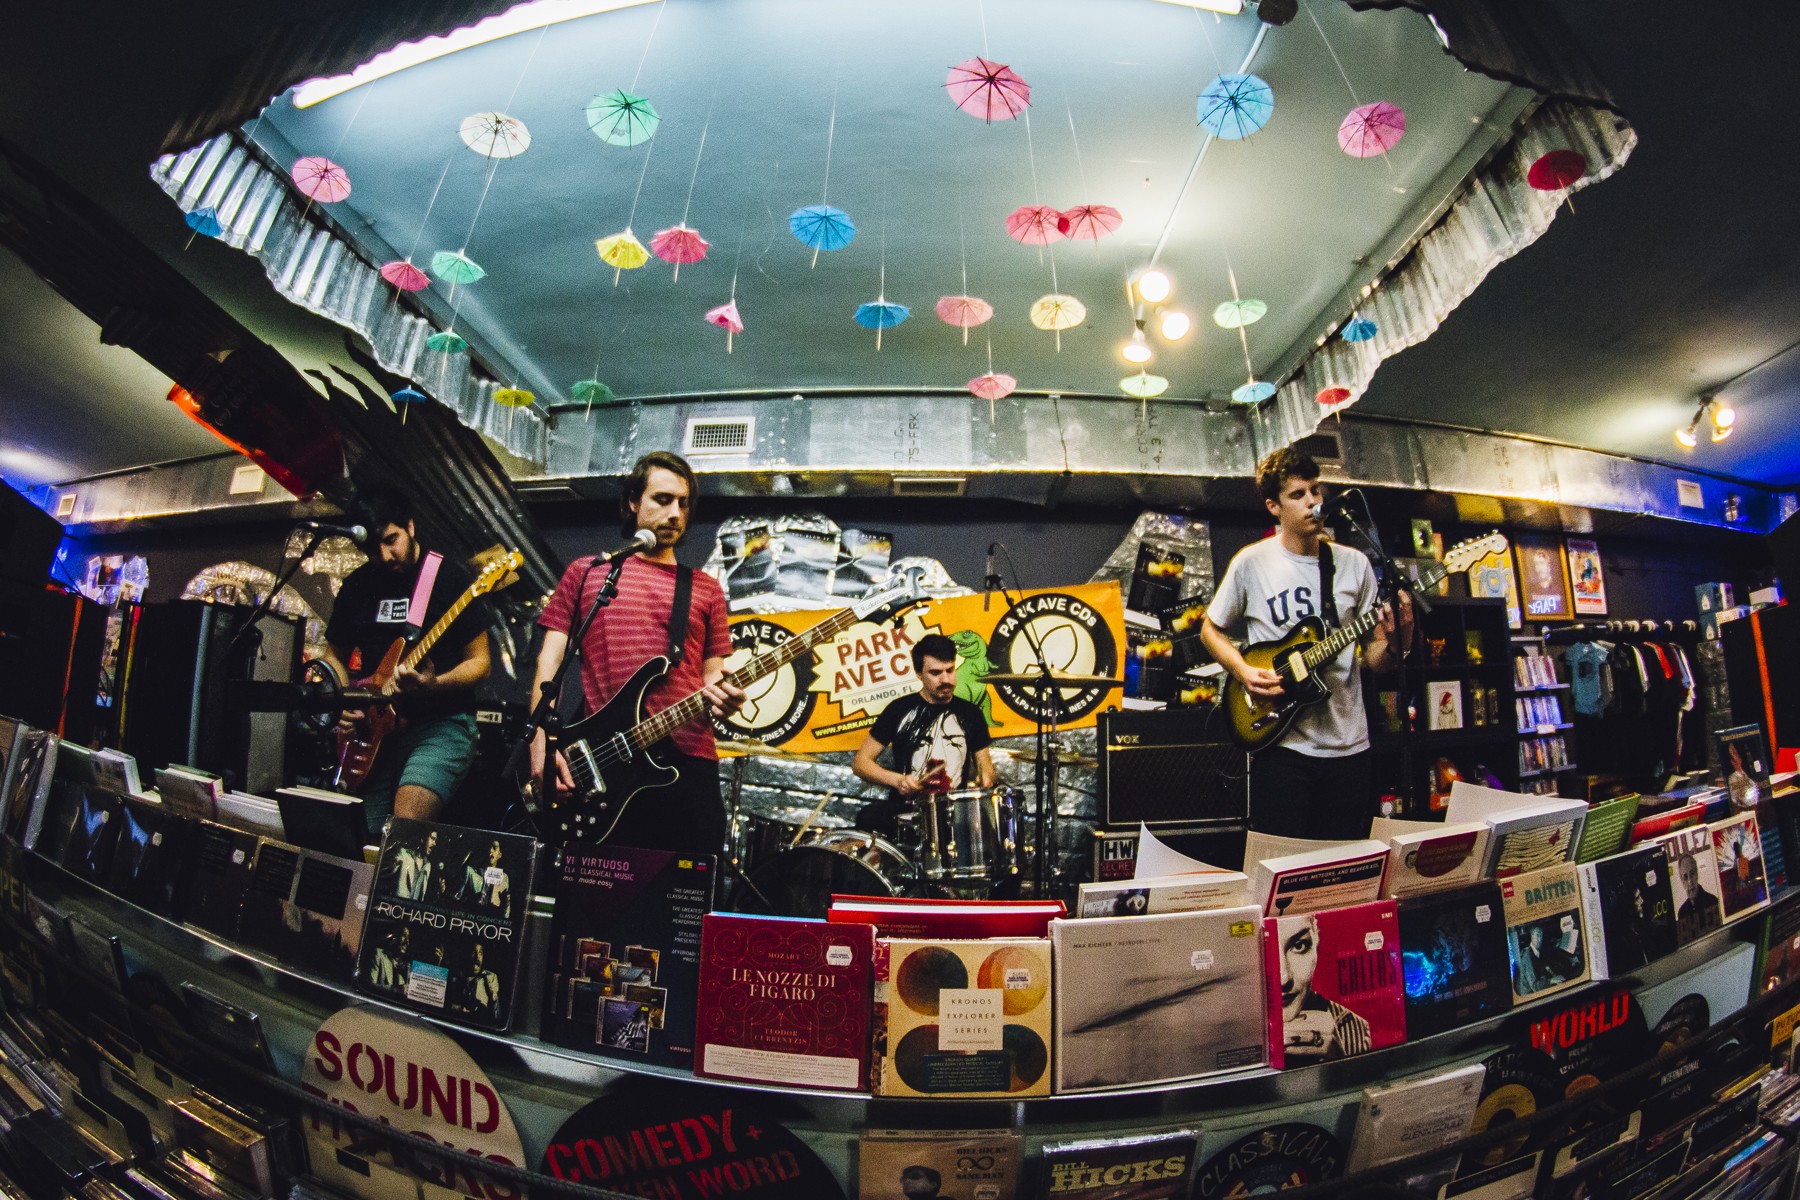 Pioneer of nothing: Photos from You Blew It!’s EP release at Park Ave CDs - Photo by James Dechert